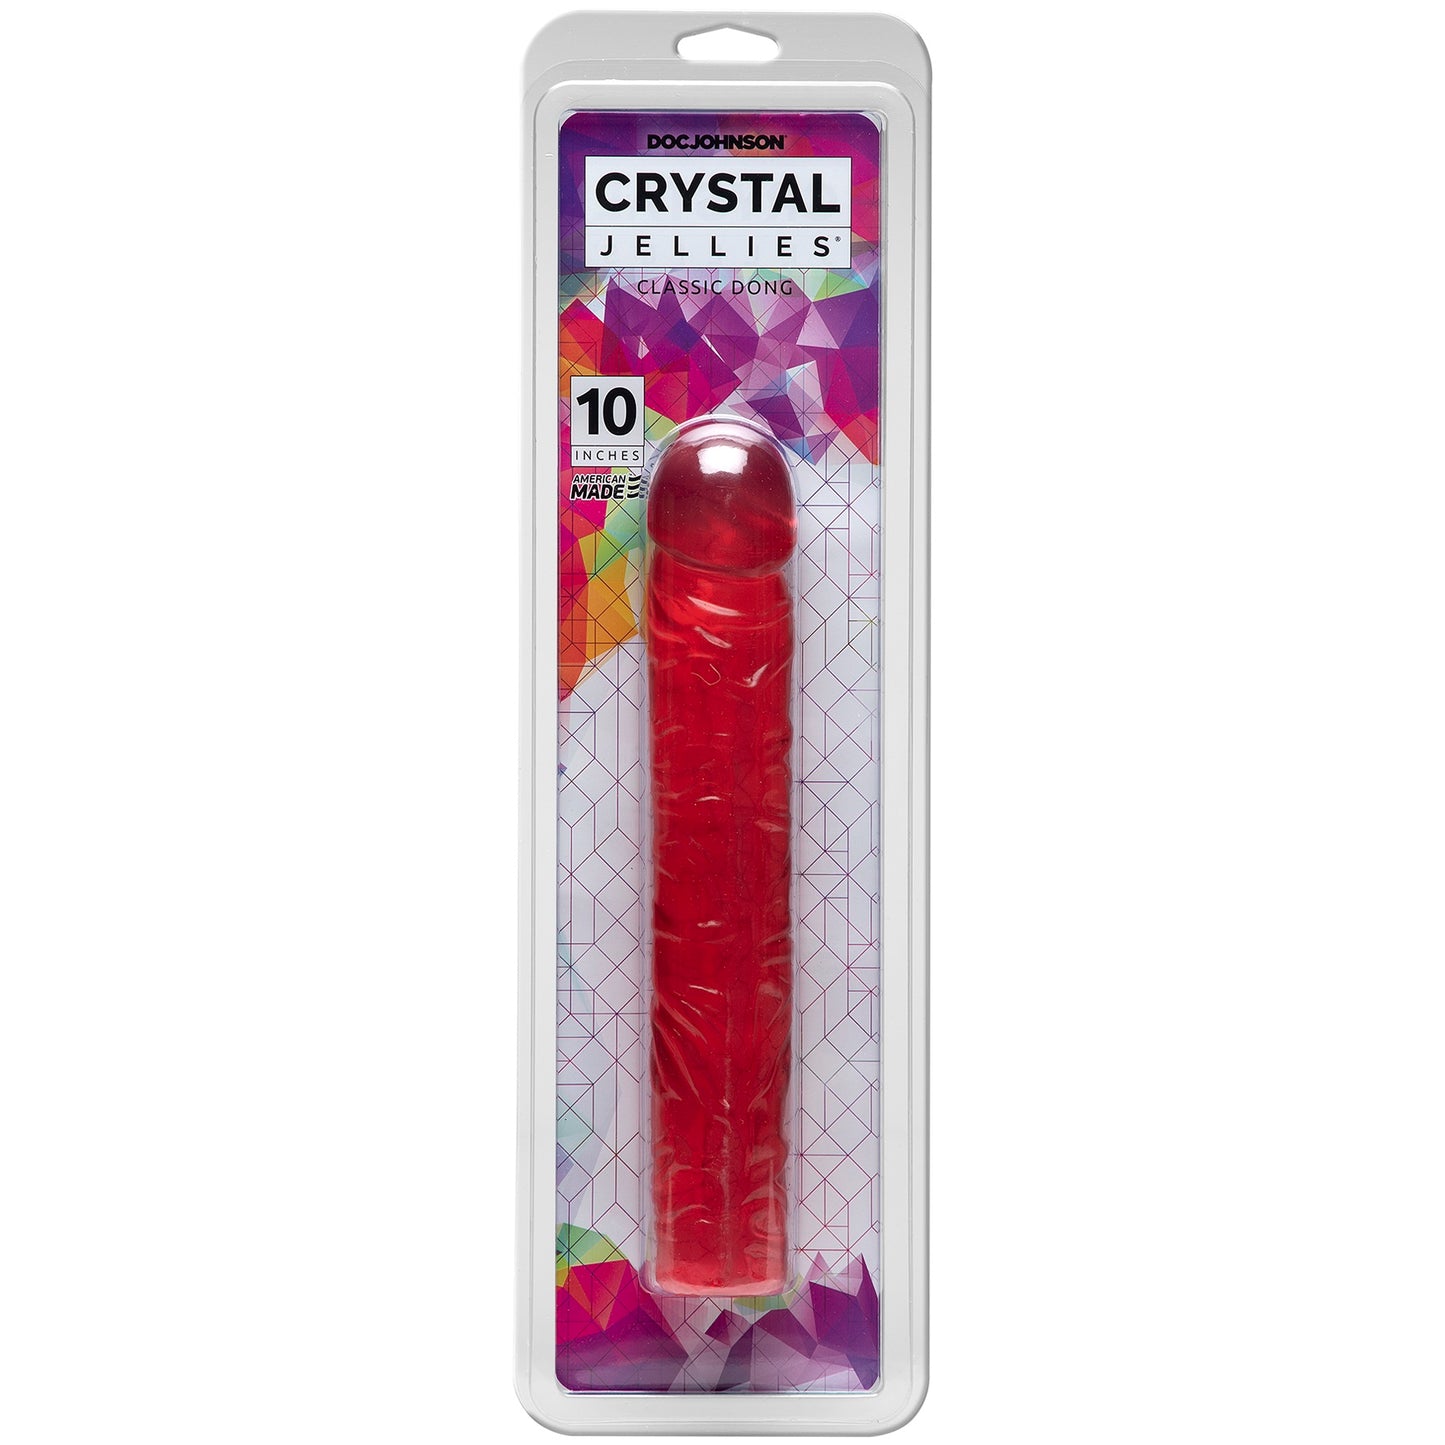 Crystal Jellies Classic Dong 10 Inch - Pink DJ0286-01